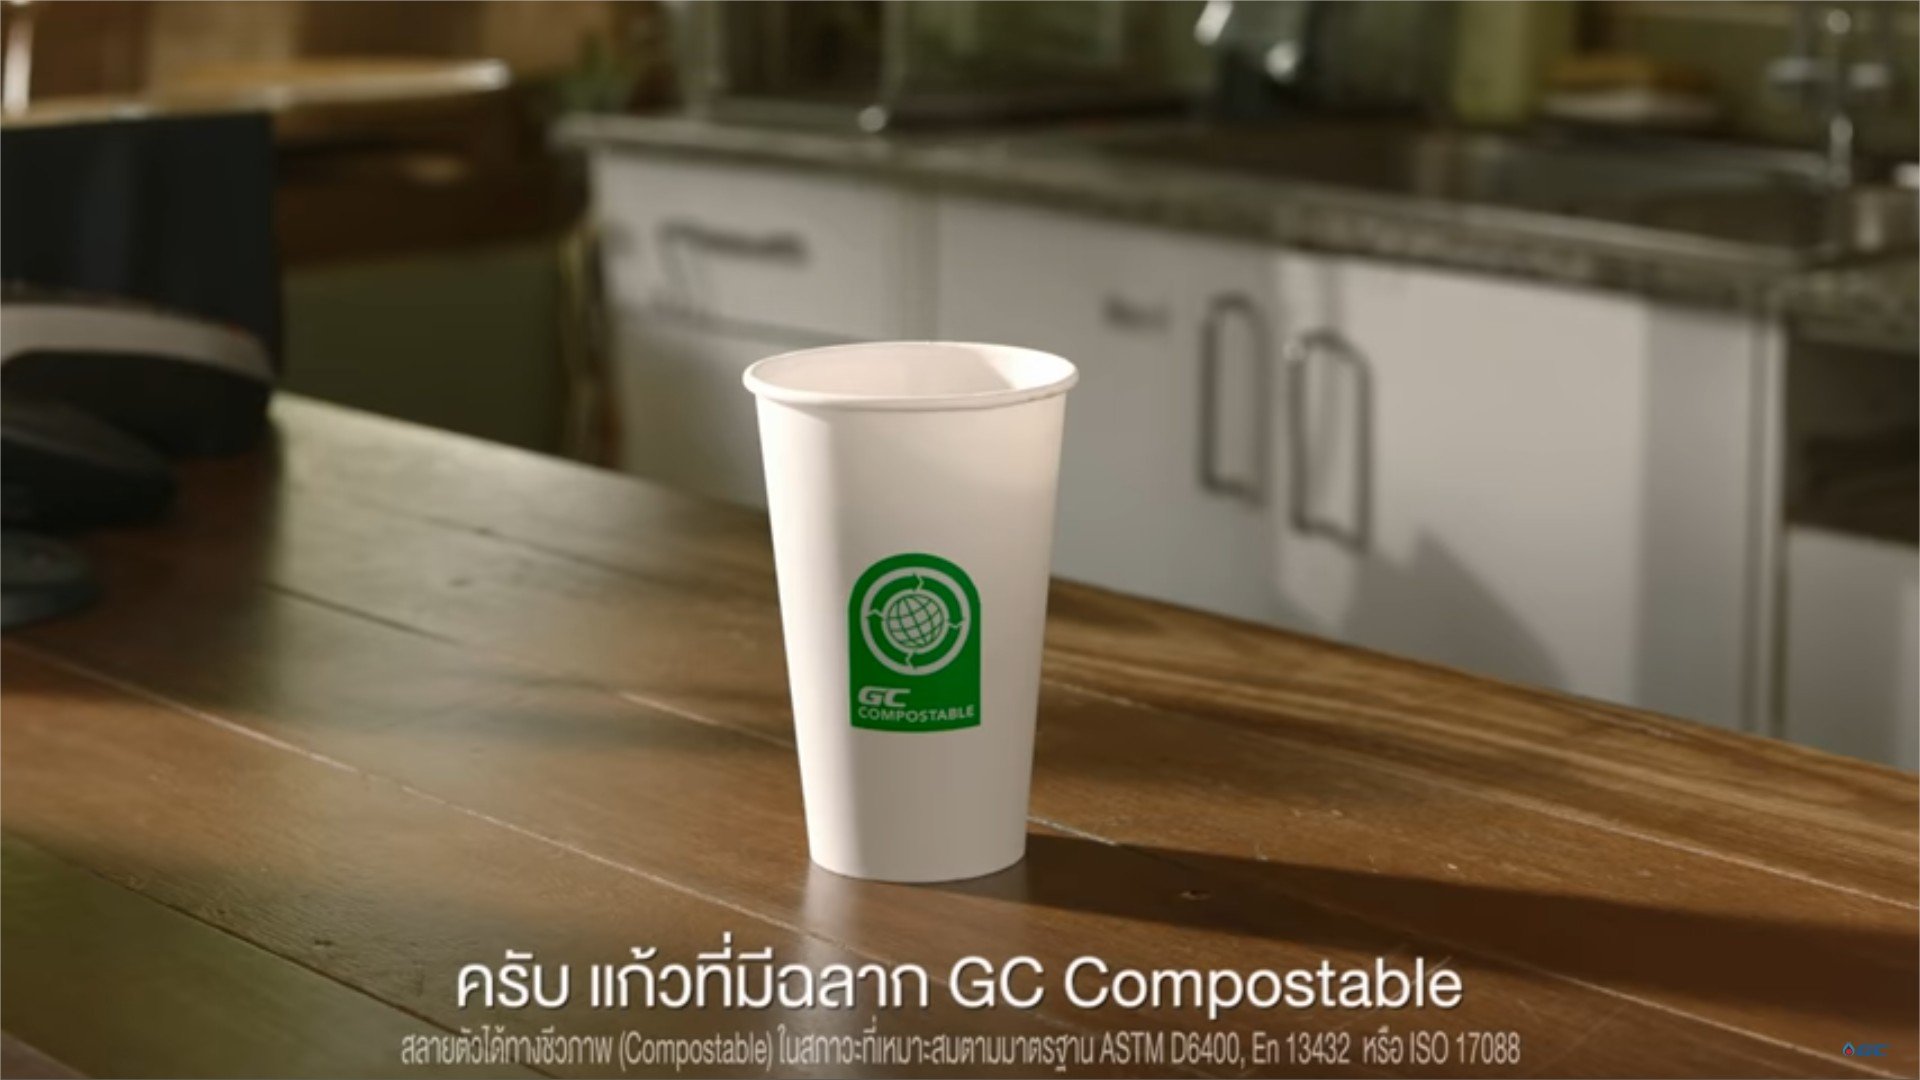 Gafe Hoping with GC Compostable Label